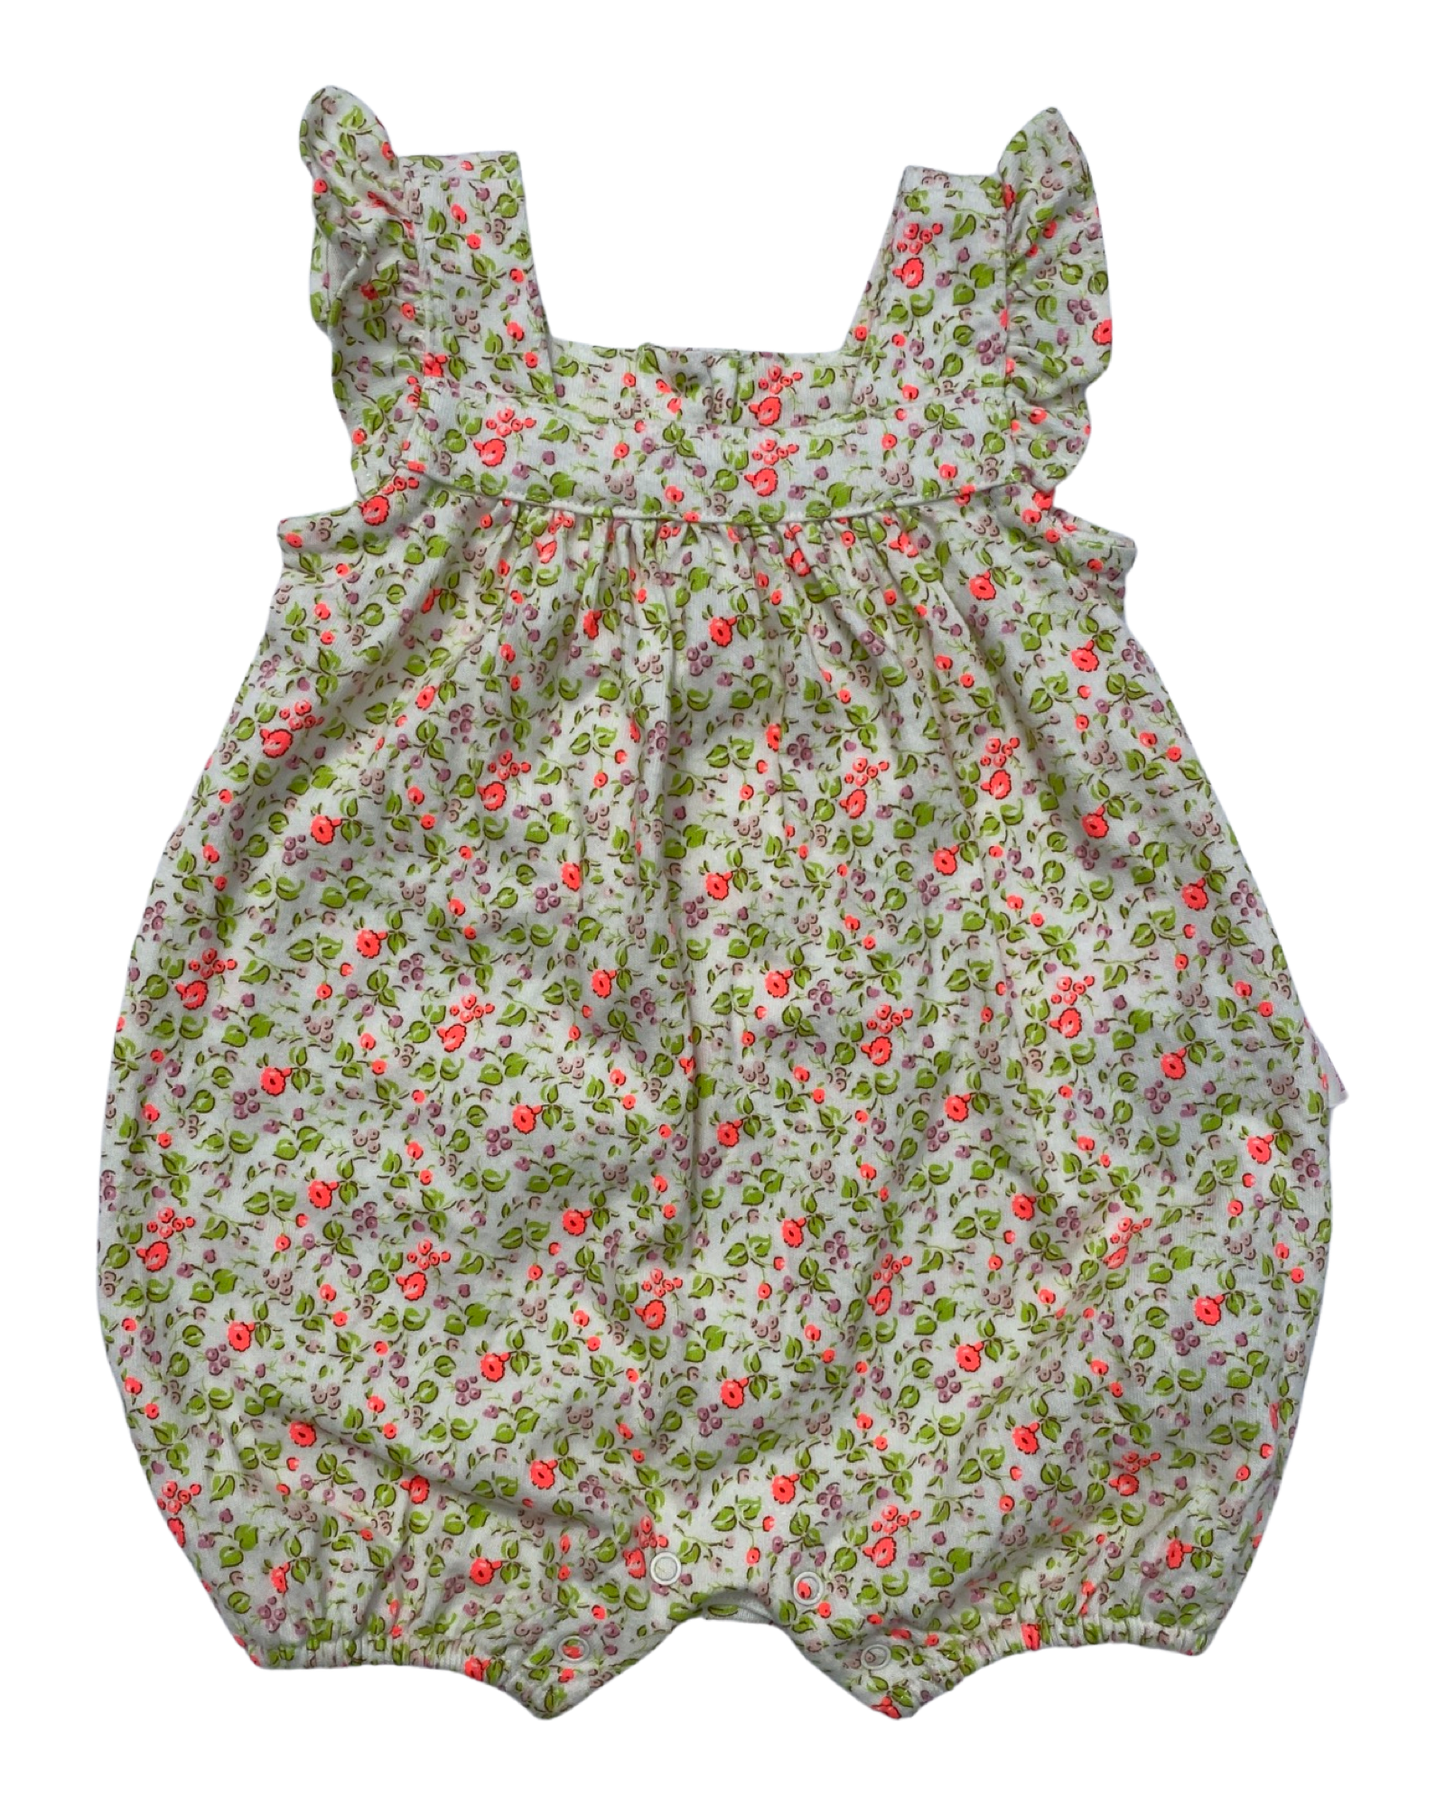 Baby Gap ditzy floral print shortie romper (size 0-3mths)